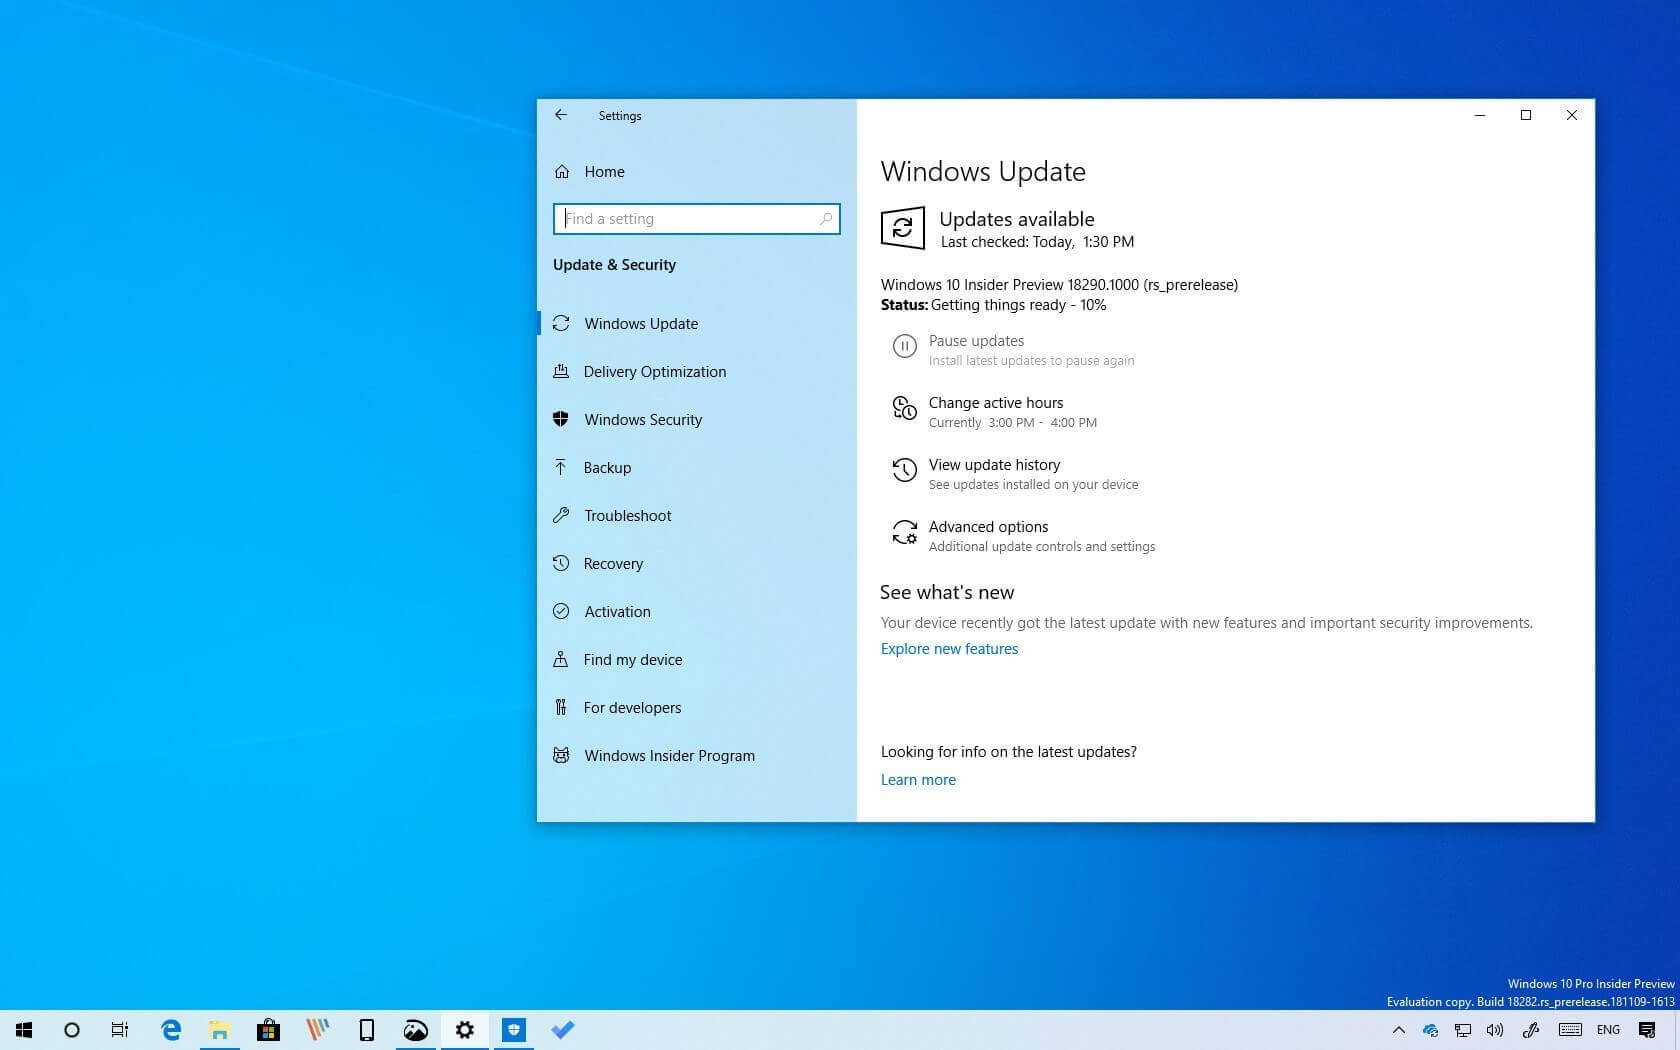 Windows updates are at it again, reportedly hanging and slowing down systems